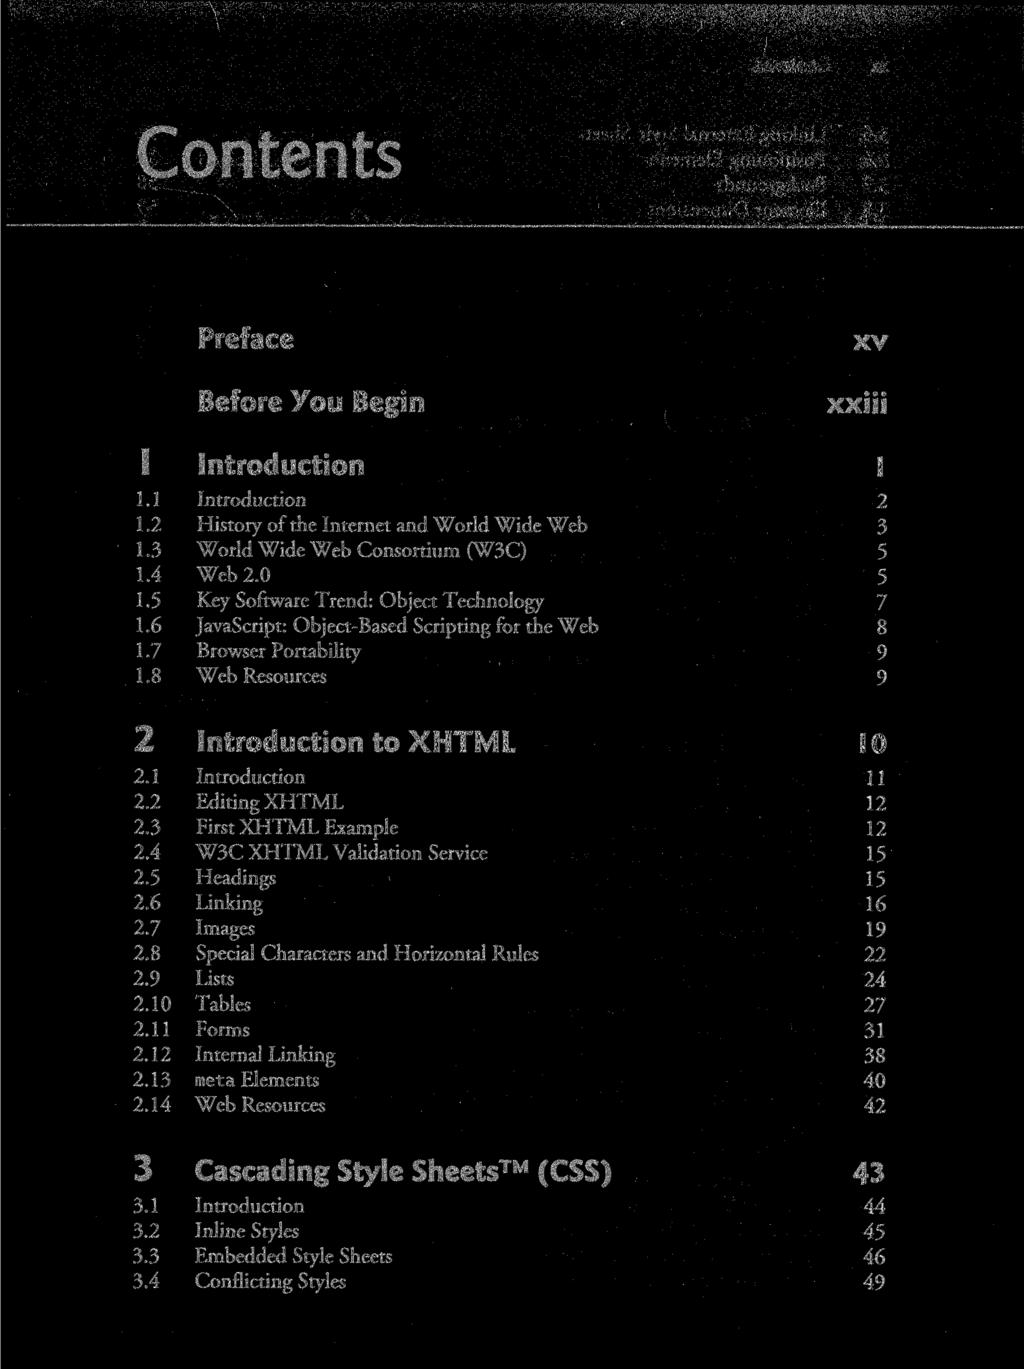 Contents Preface Before Уои Begin xv xxiii i Introduction I 1.1 Introduction 2 1.2 History of the Internet and World Wide Web 3 1.3 World Wide Web Consortium (W3C) 5 1.4 Web 2.0 5 1.